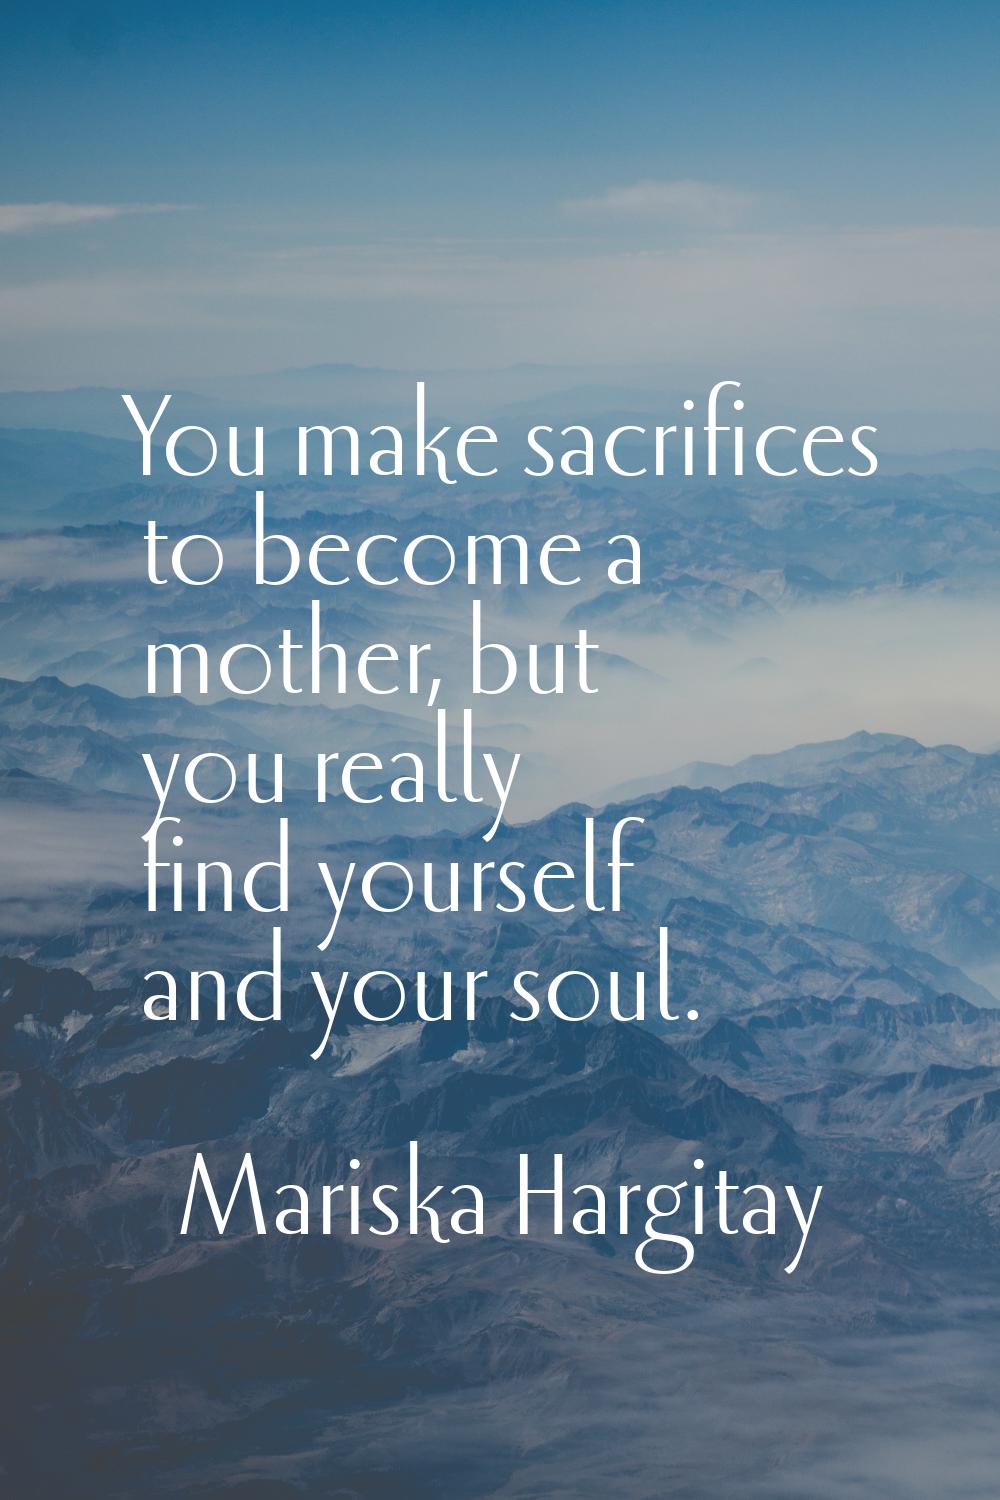 You make sacrifices to become a mother, but you really find yourself and your soul.